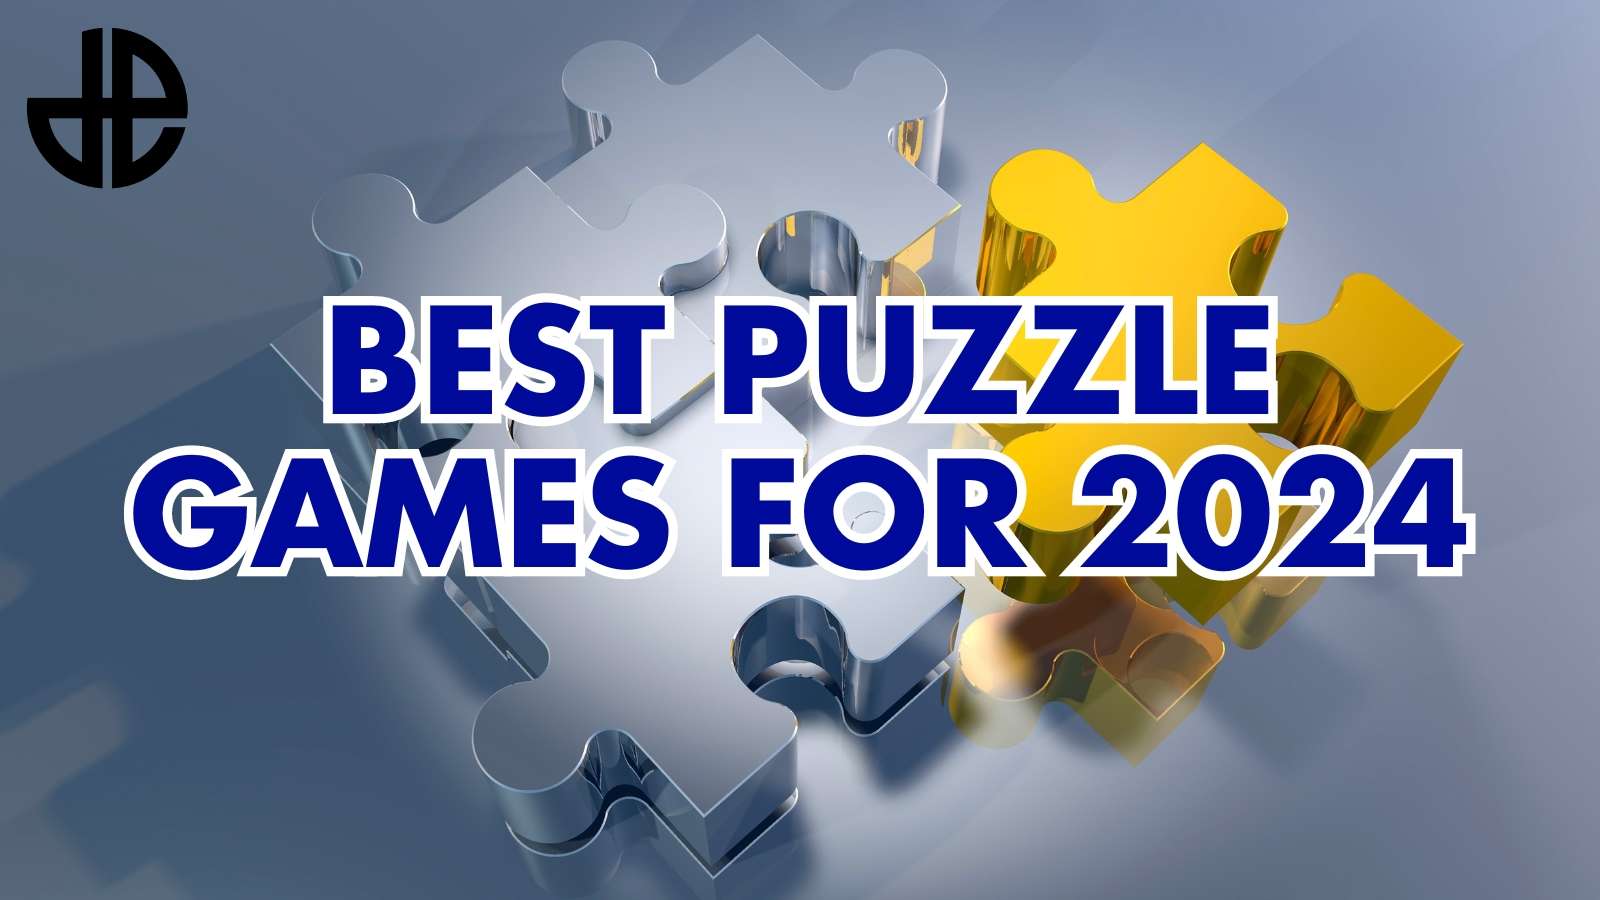 BEST PUZZLE GAMES FOR 2024 COVER